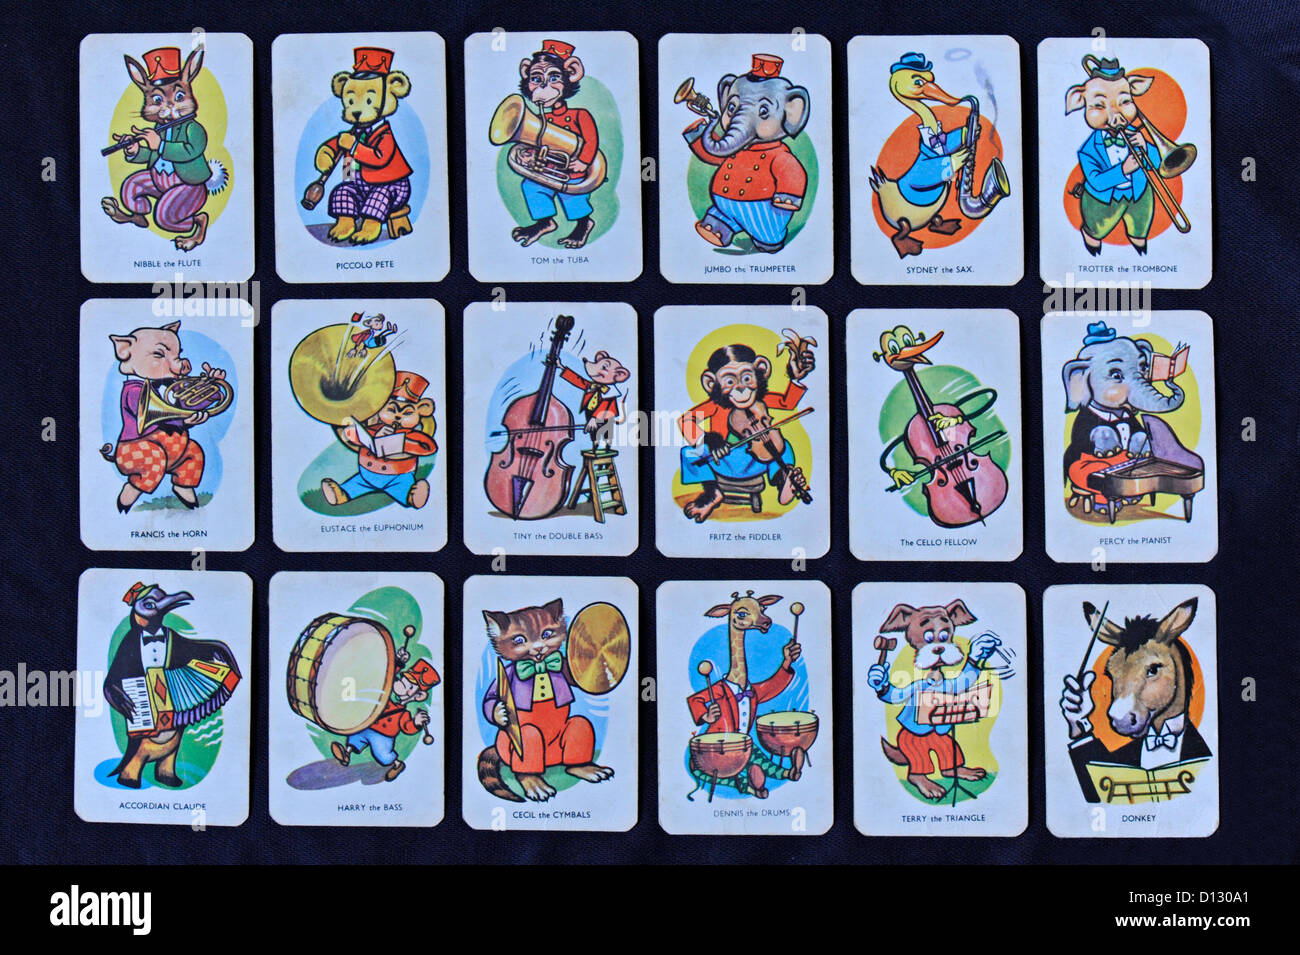 Character cards for the game of Donkey Stock Photo